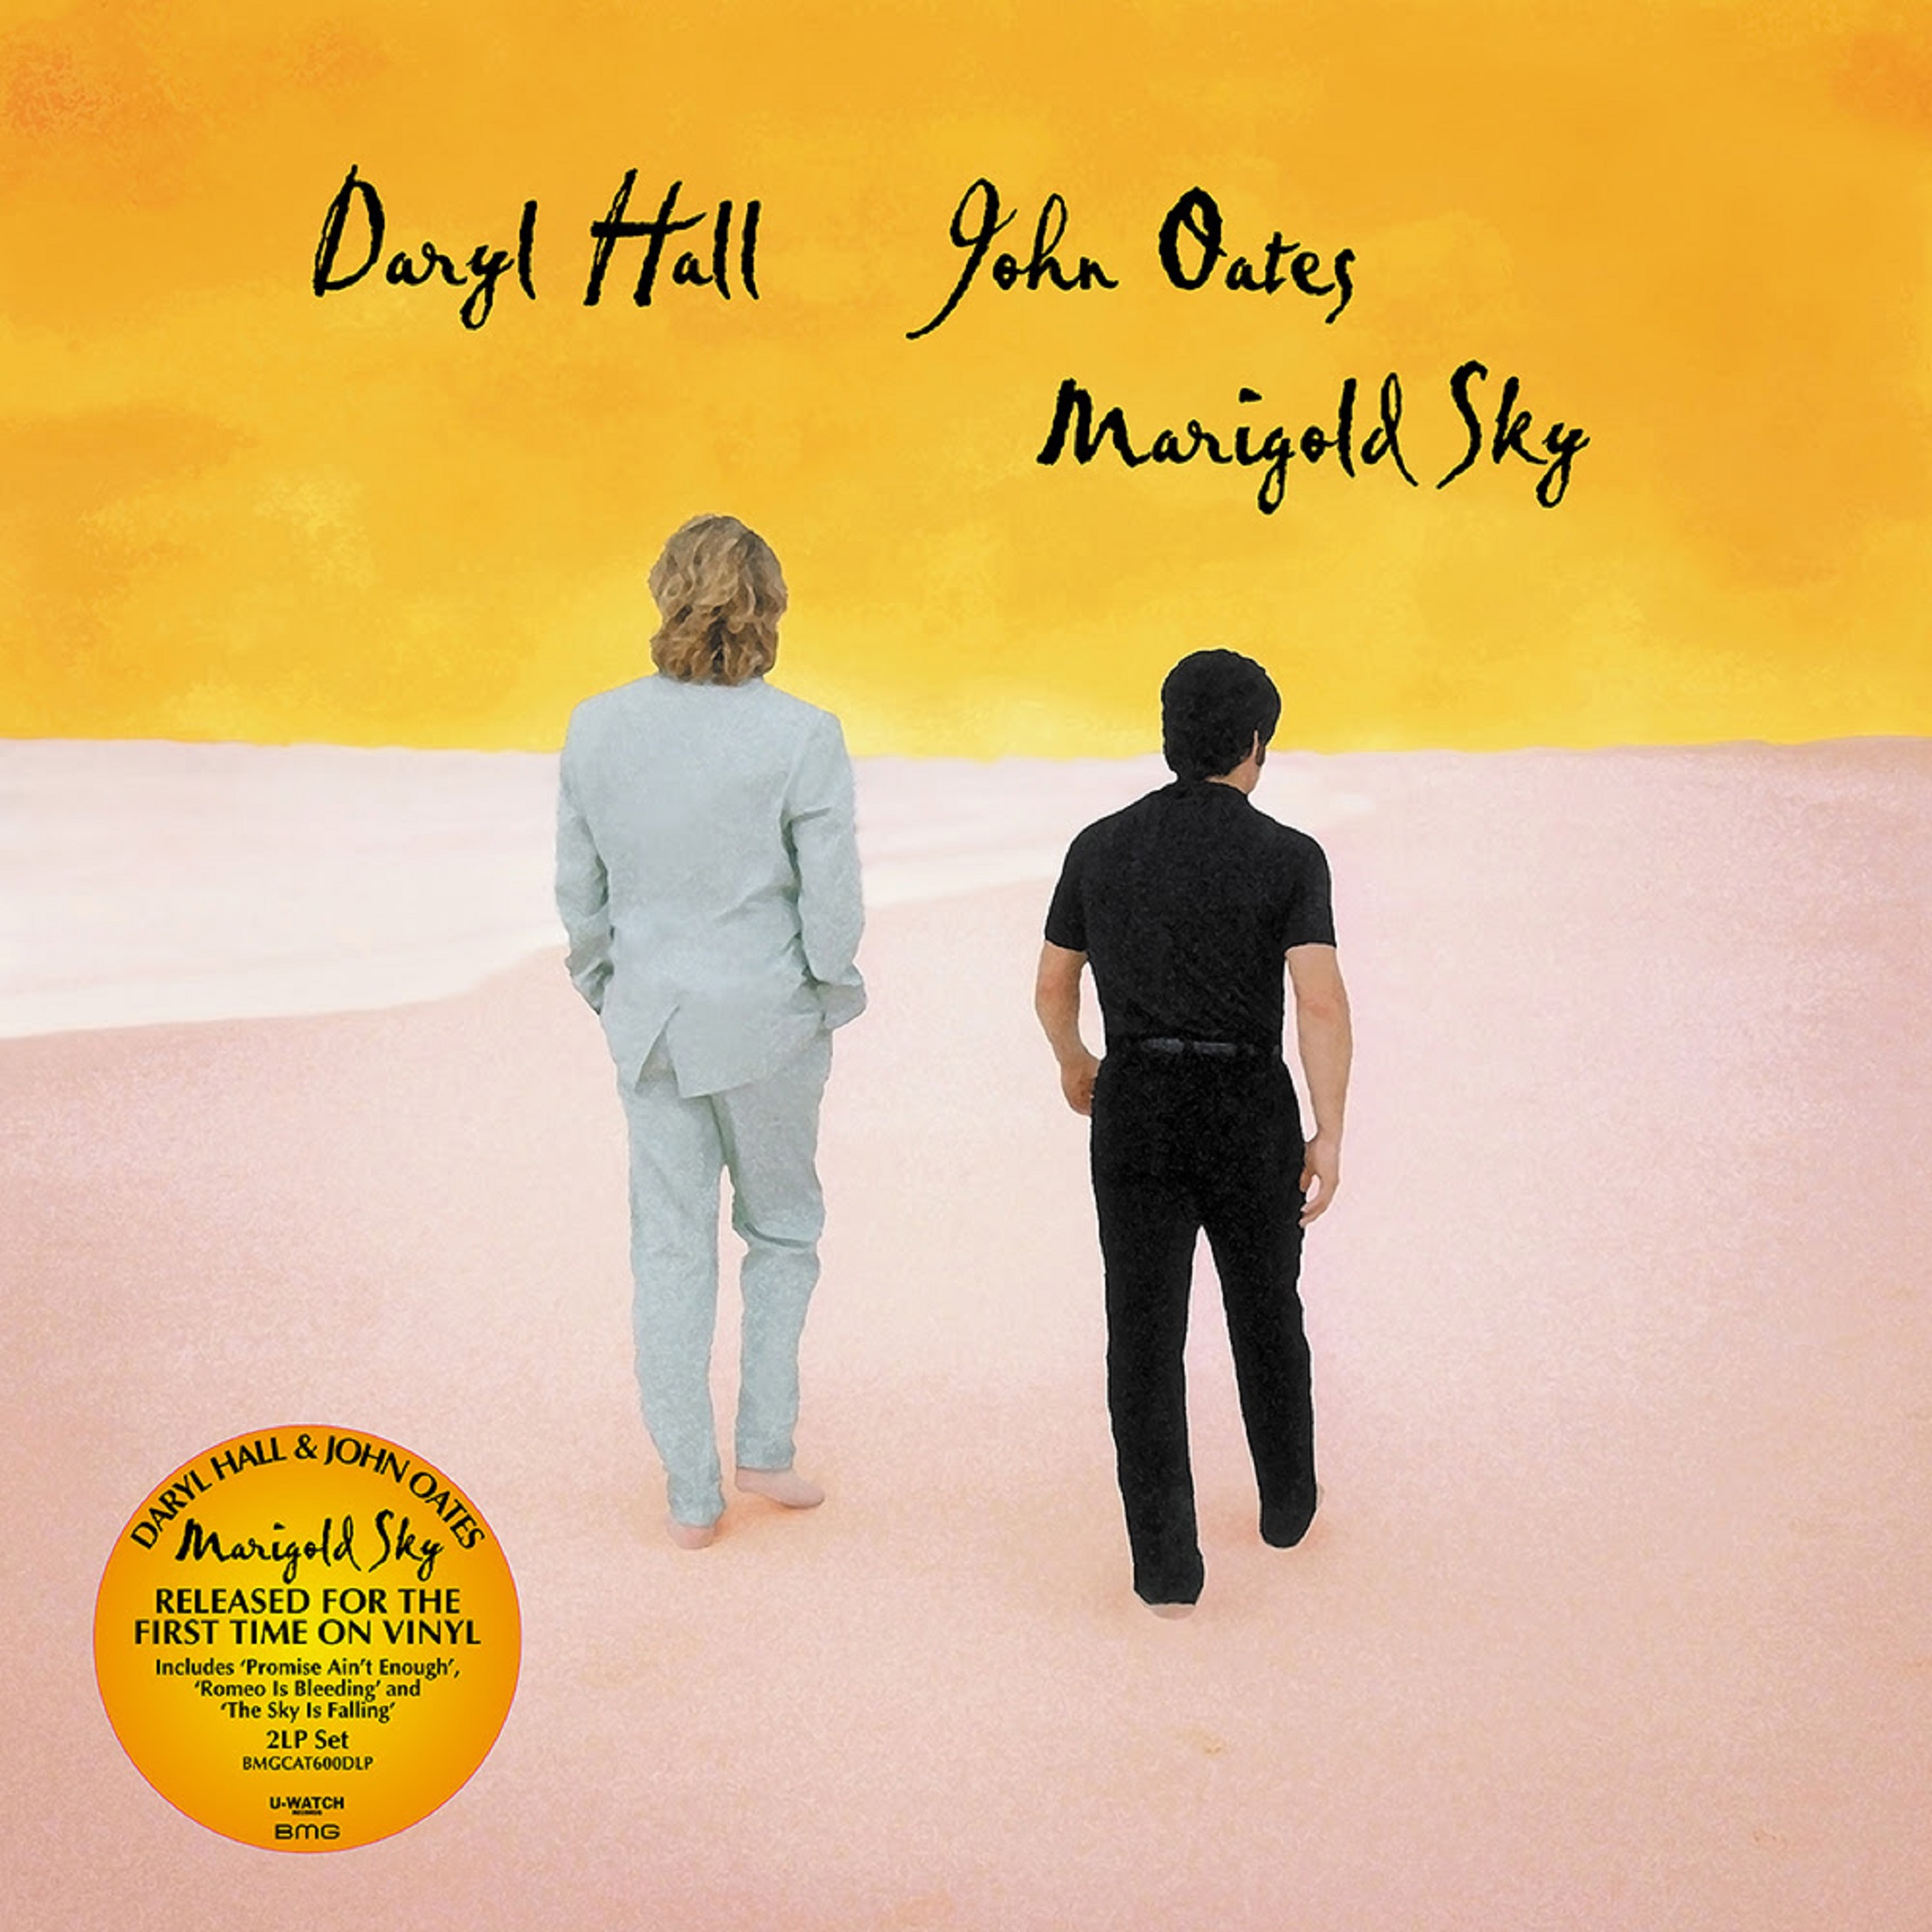 DARYL HALL AND JOHN OATES RELEASE 1997 ALBUM ‘MARIGOLD SKY’ FOR THE FIRST TIME EVER ON VINYL